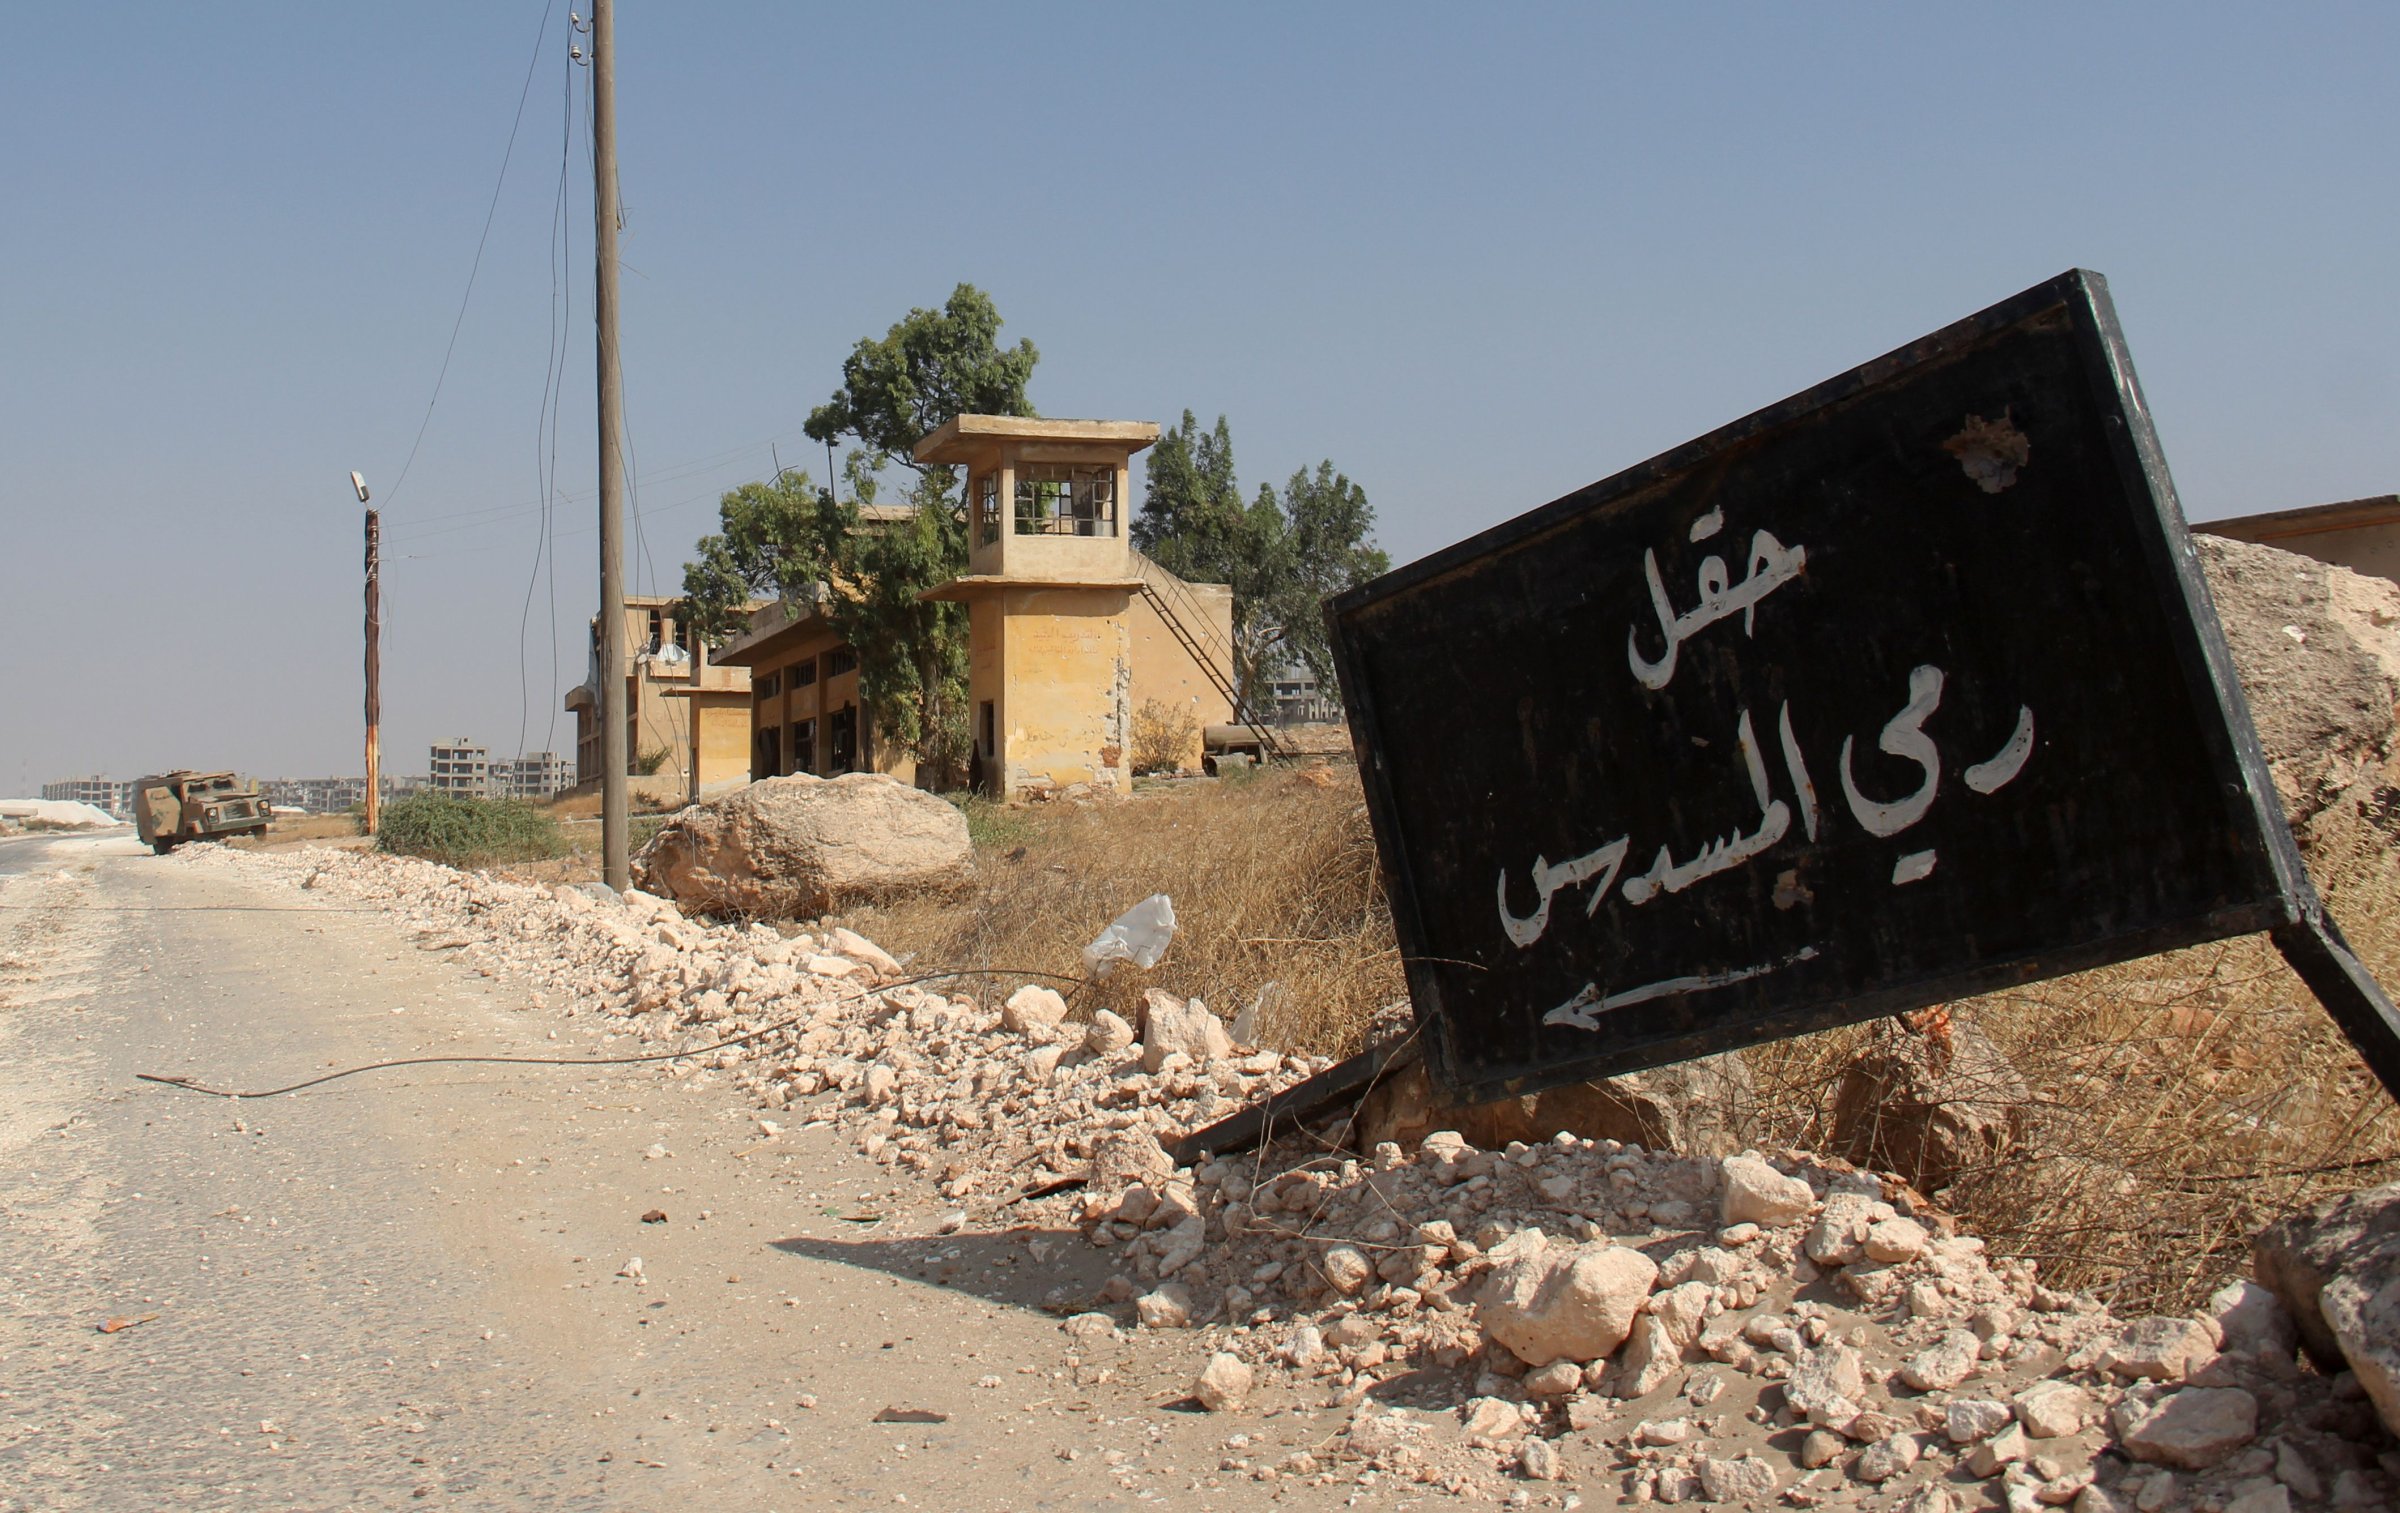 A sign reading in Arabic, "Shooting Range," is seen at a military academy south of Aleppo, Syria, after the former Nusra Front — renamed Jabhat Fateh al-Sham after breaking from al-Qaeda — announced they seized control of two military academies and a third military position, the Syrian Observatory for Human Rights said on Aug. 6, 2016.